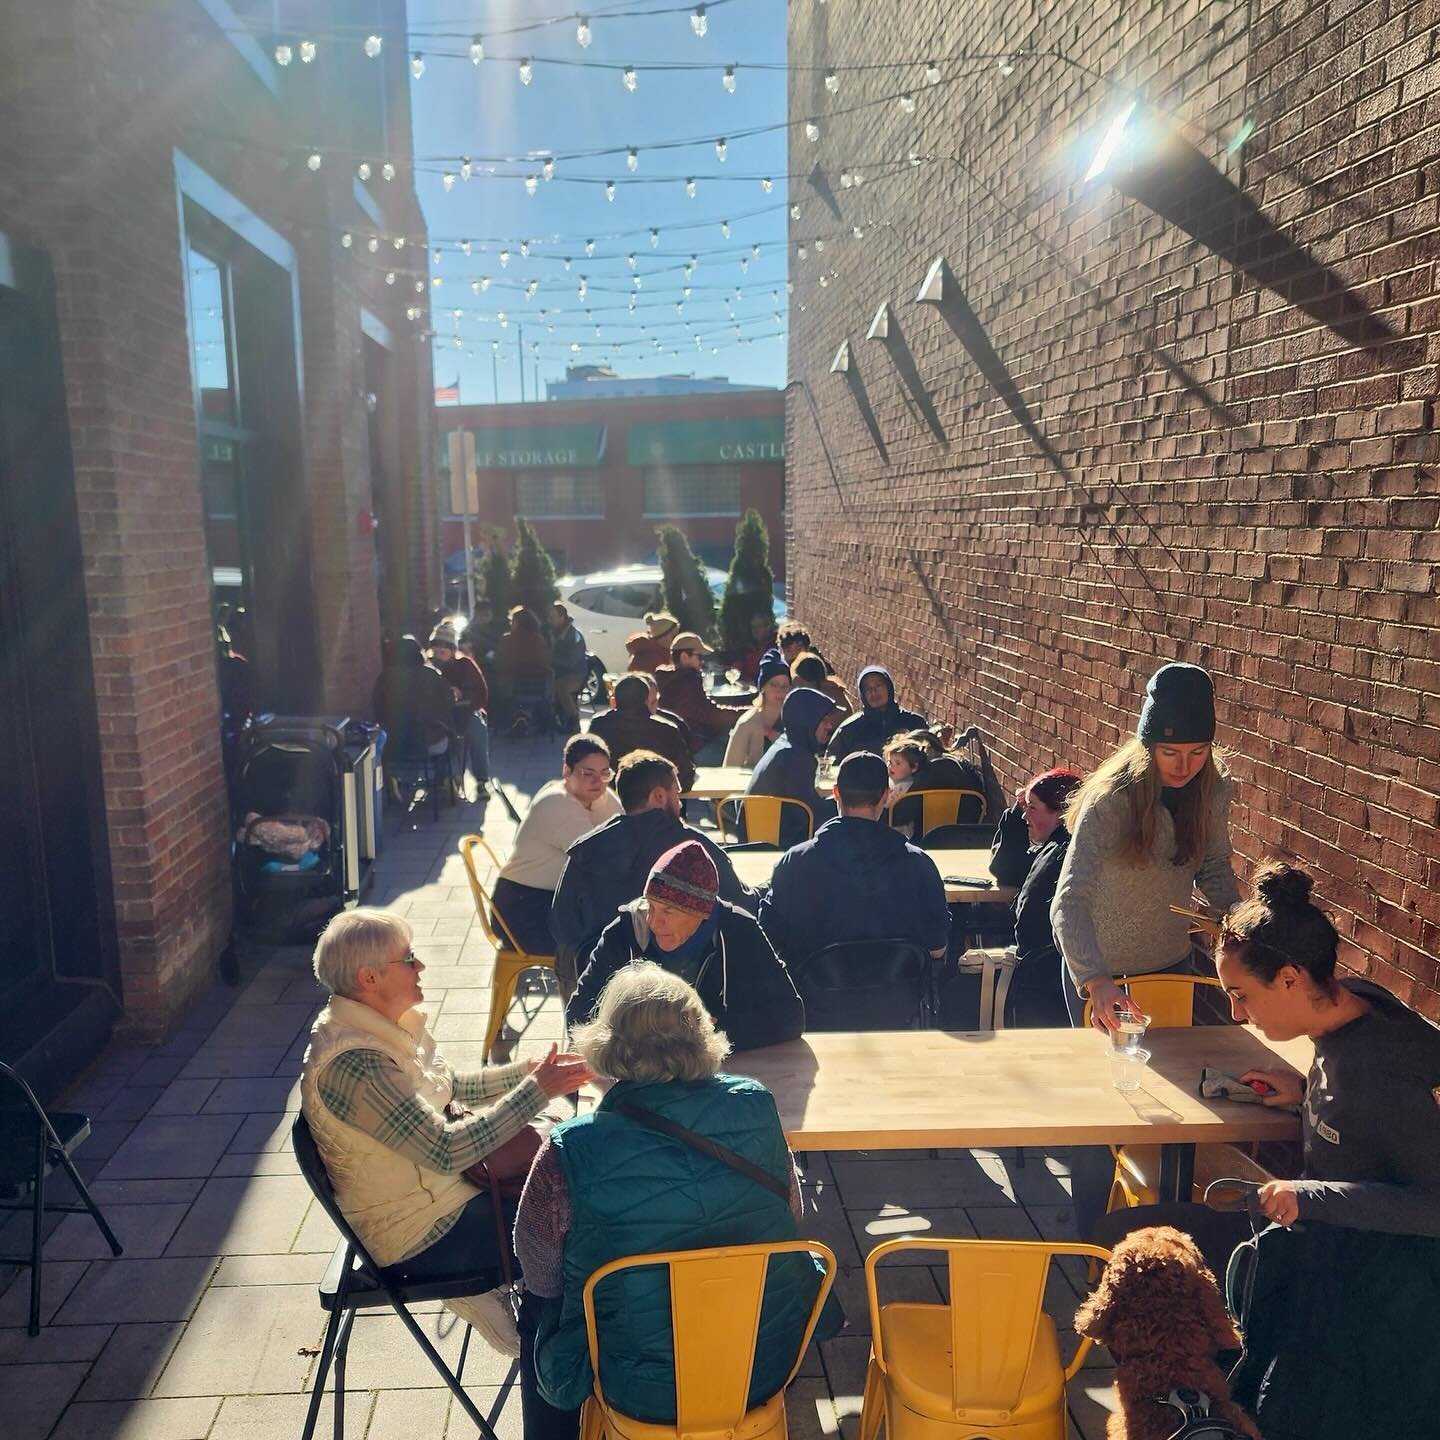 ☀️Pair the upcoming warm weather with a delicious plate of Mei Mei dumplings and a sunny spot to enjoy them🍽️

👯Our patio is the perfect spot to hang with friends, take a lunch break, read a book, play some games, the list could go on&hellip;

We a